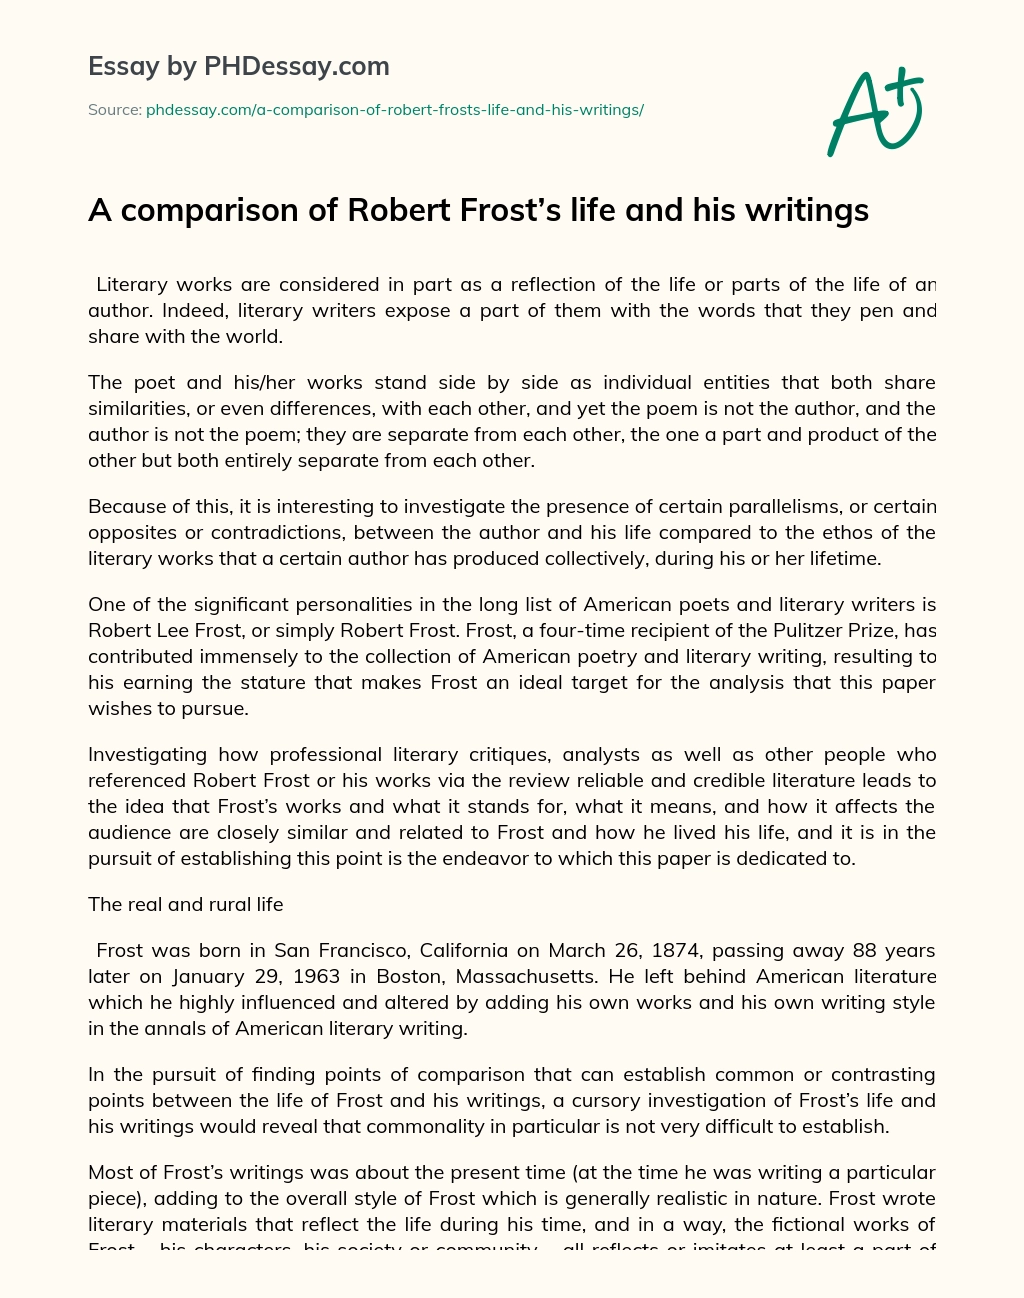 A comparison of Robert Frost’s life and his writings essay